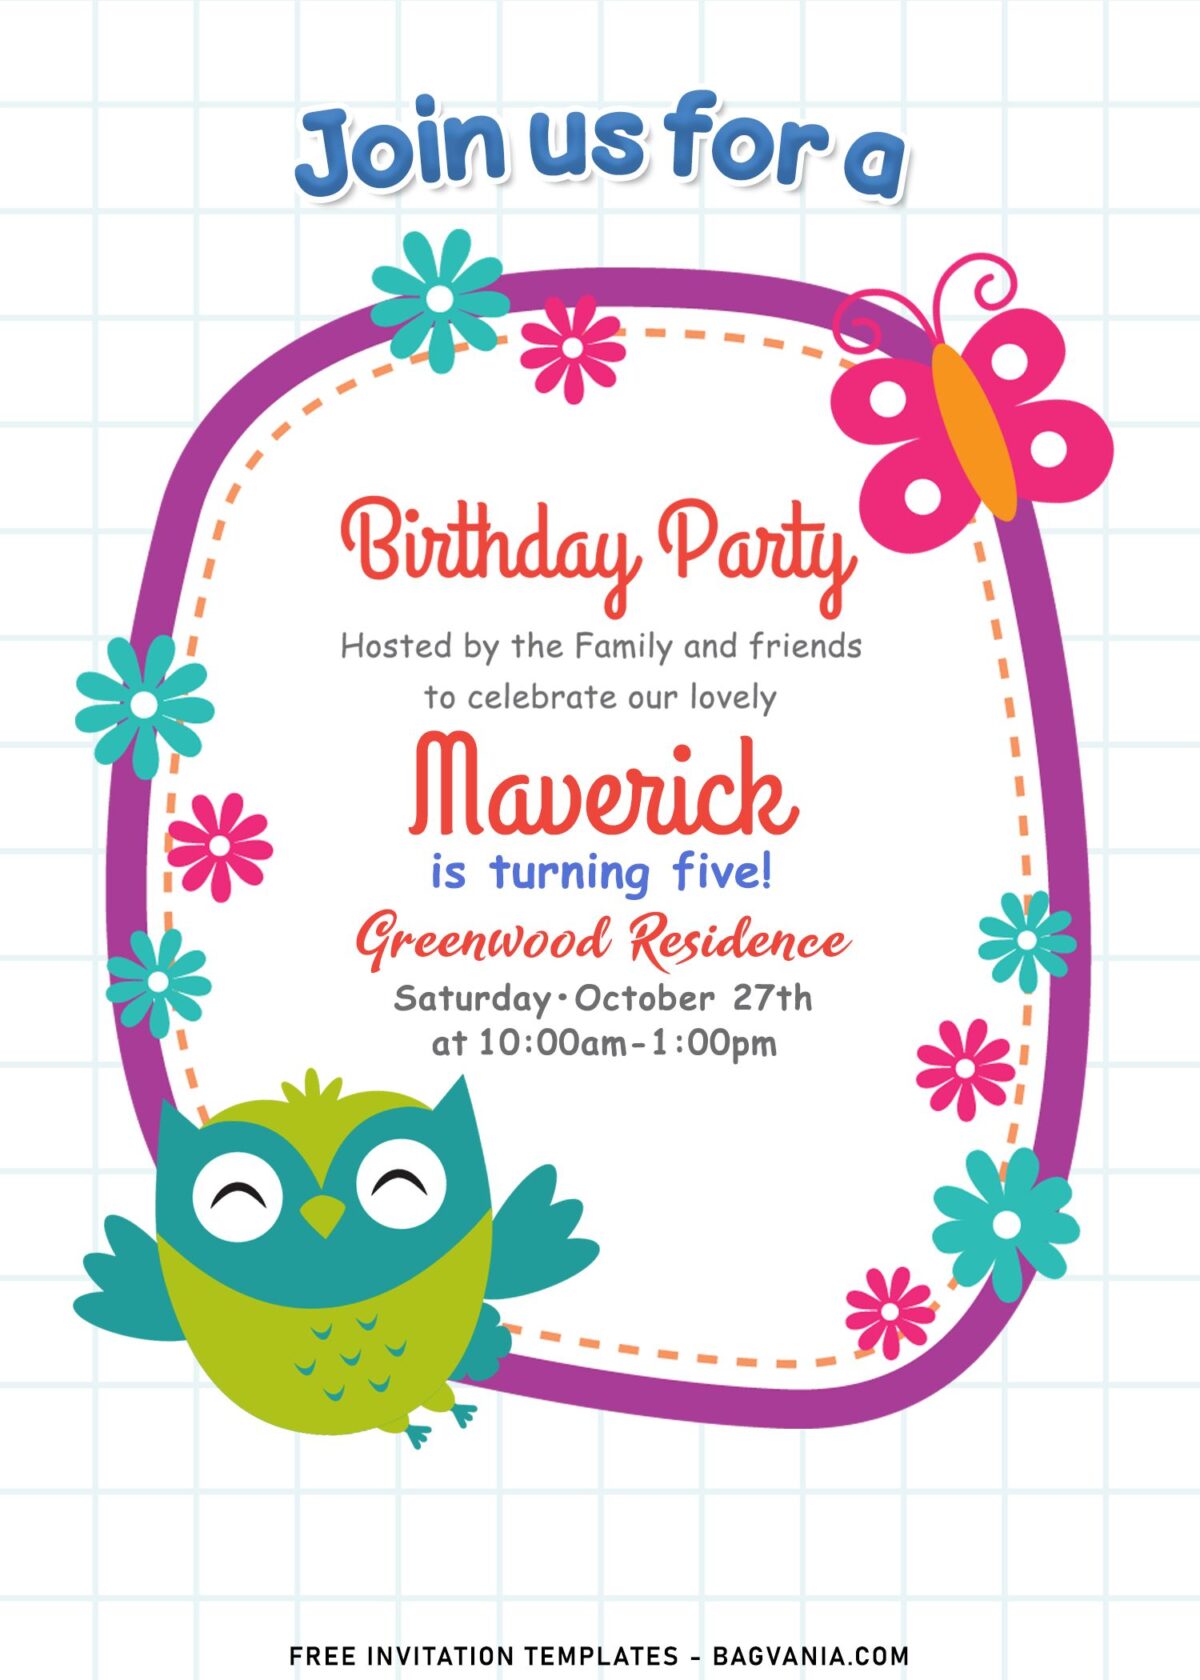 11+ Cute Owl Birthday Invitation Templates For Your Little Ones' Birthday